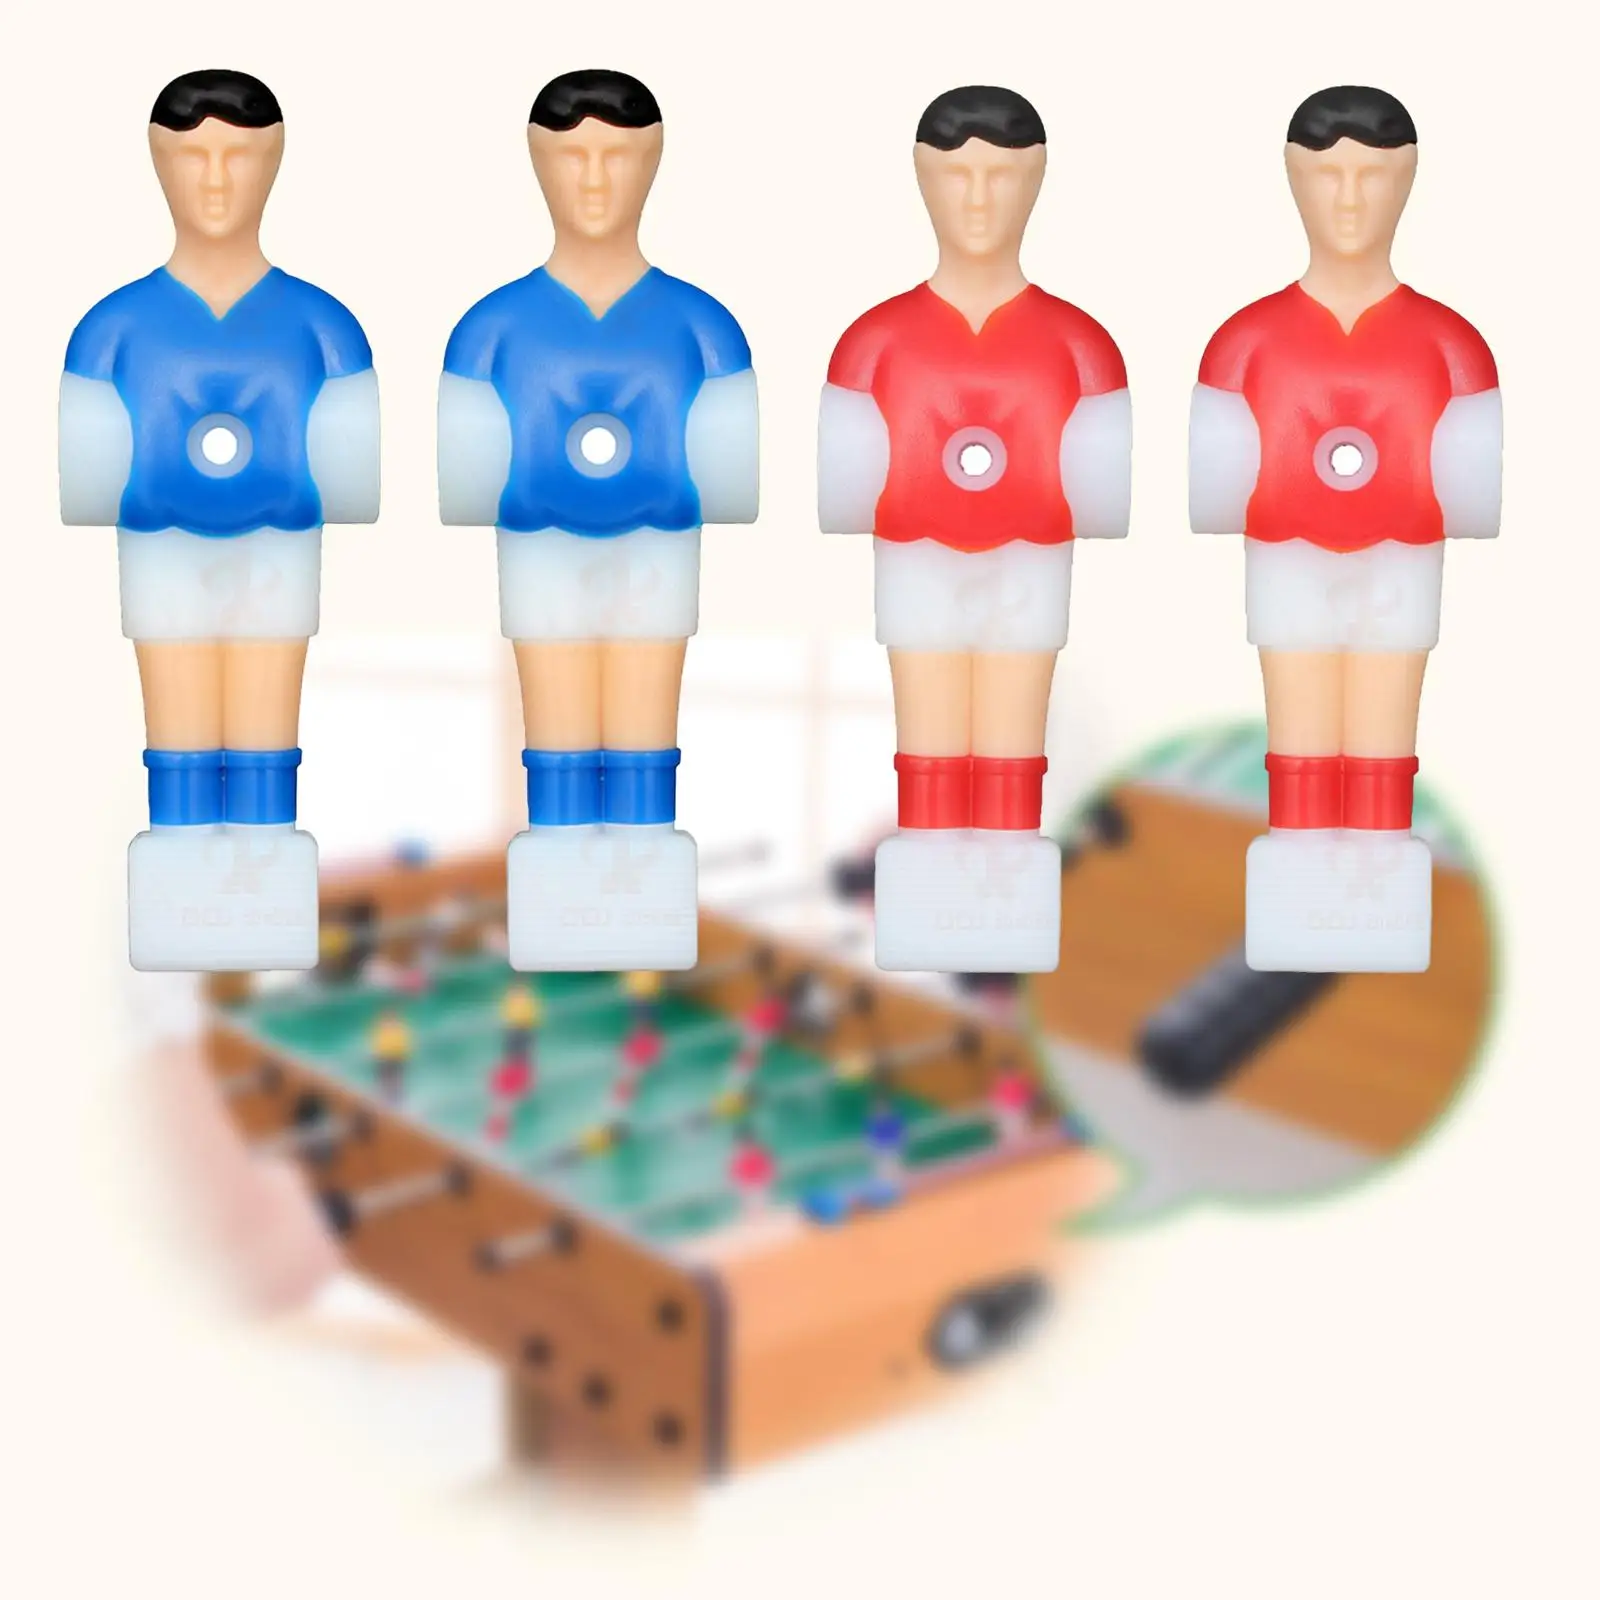 4Pcs Mini Doll Table Football Men Replacement Soccer Table Player Football Players Figures Toys Table Football Player Accessory bizzy bear football player